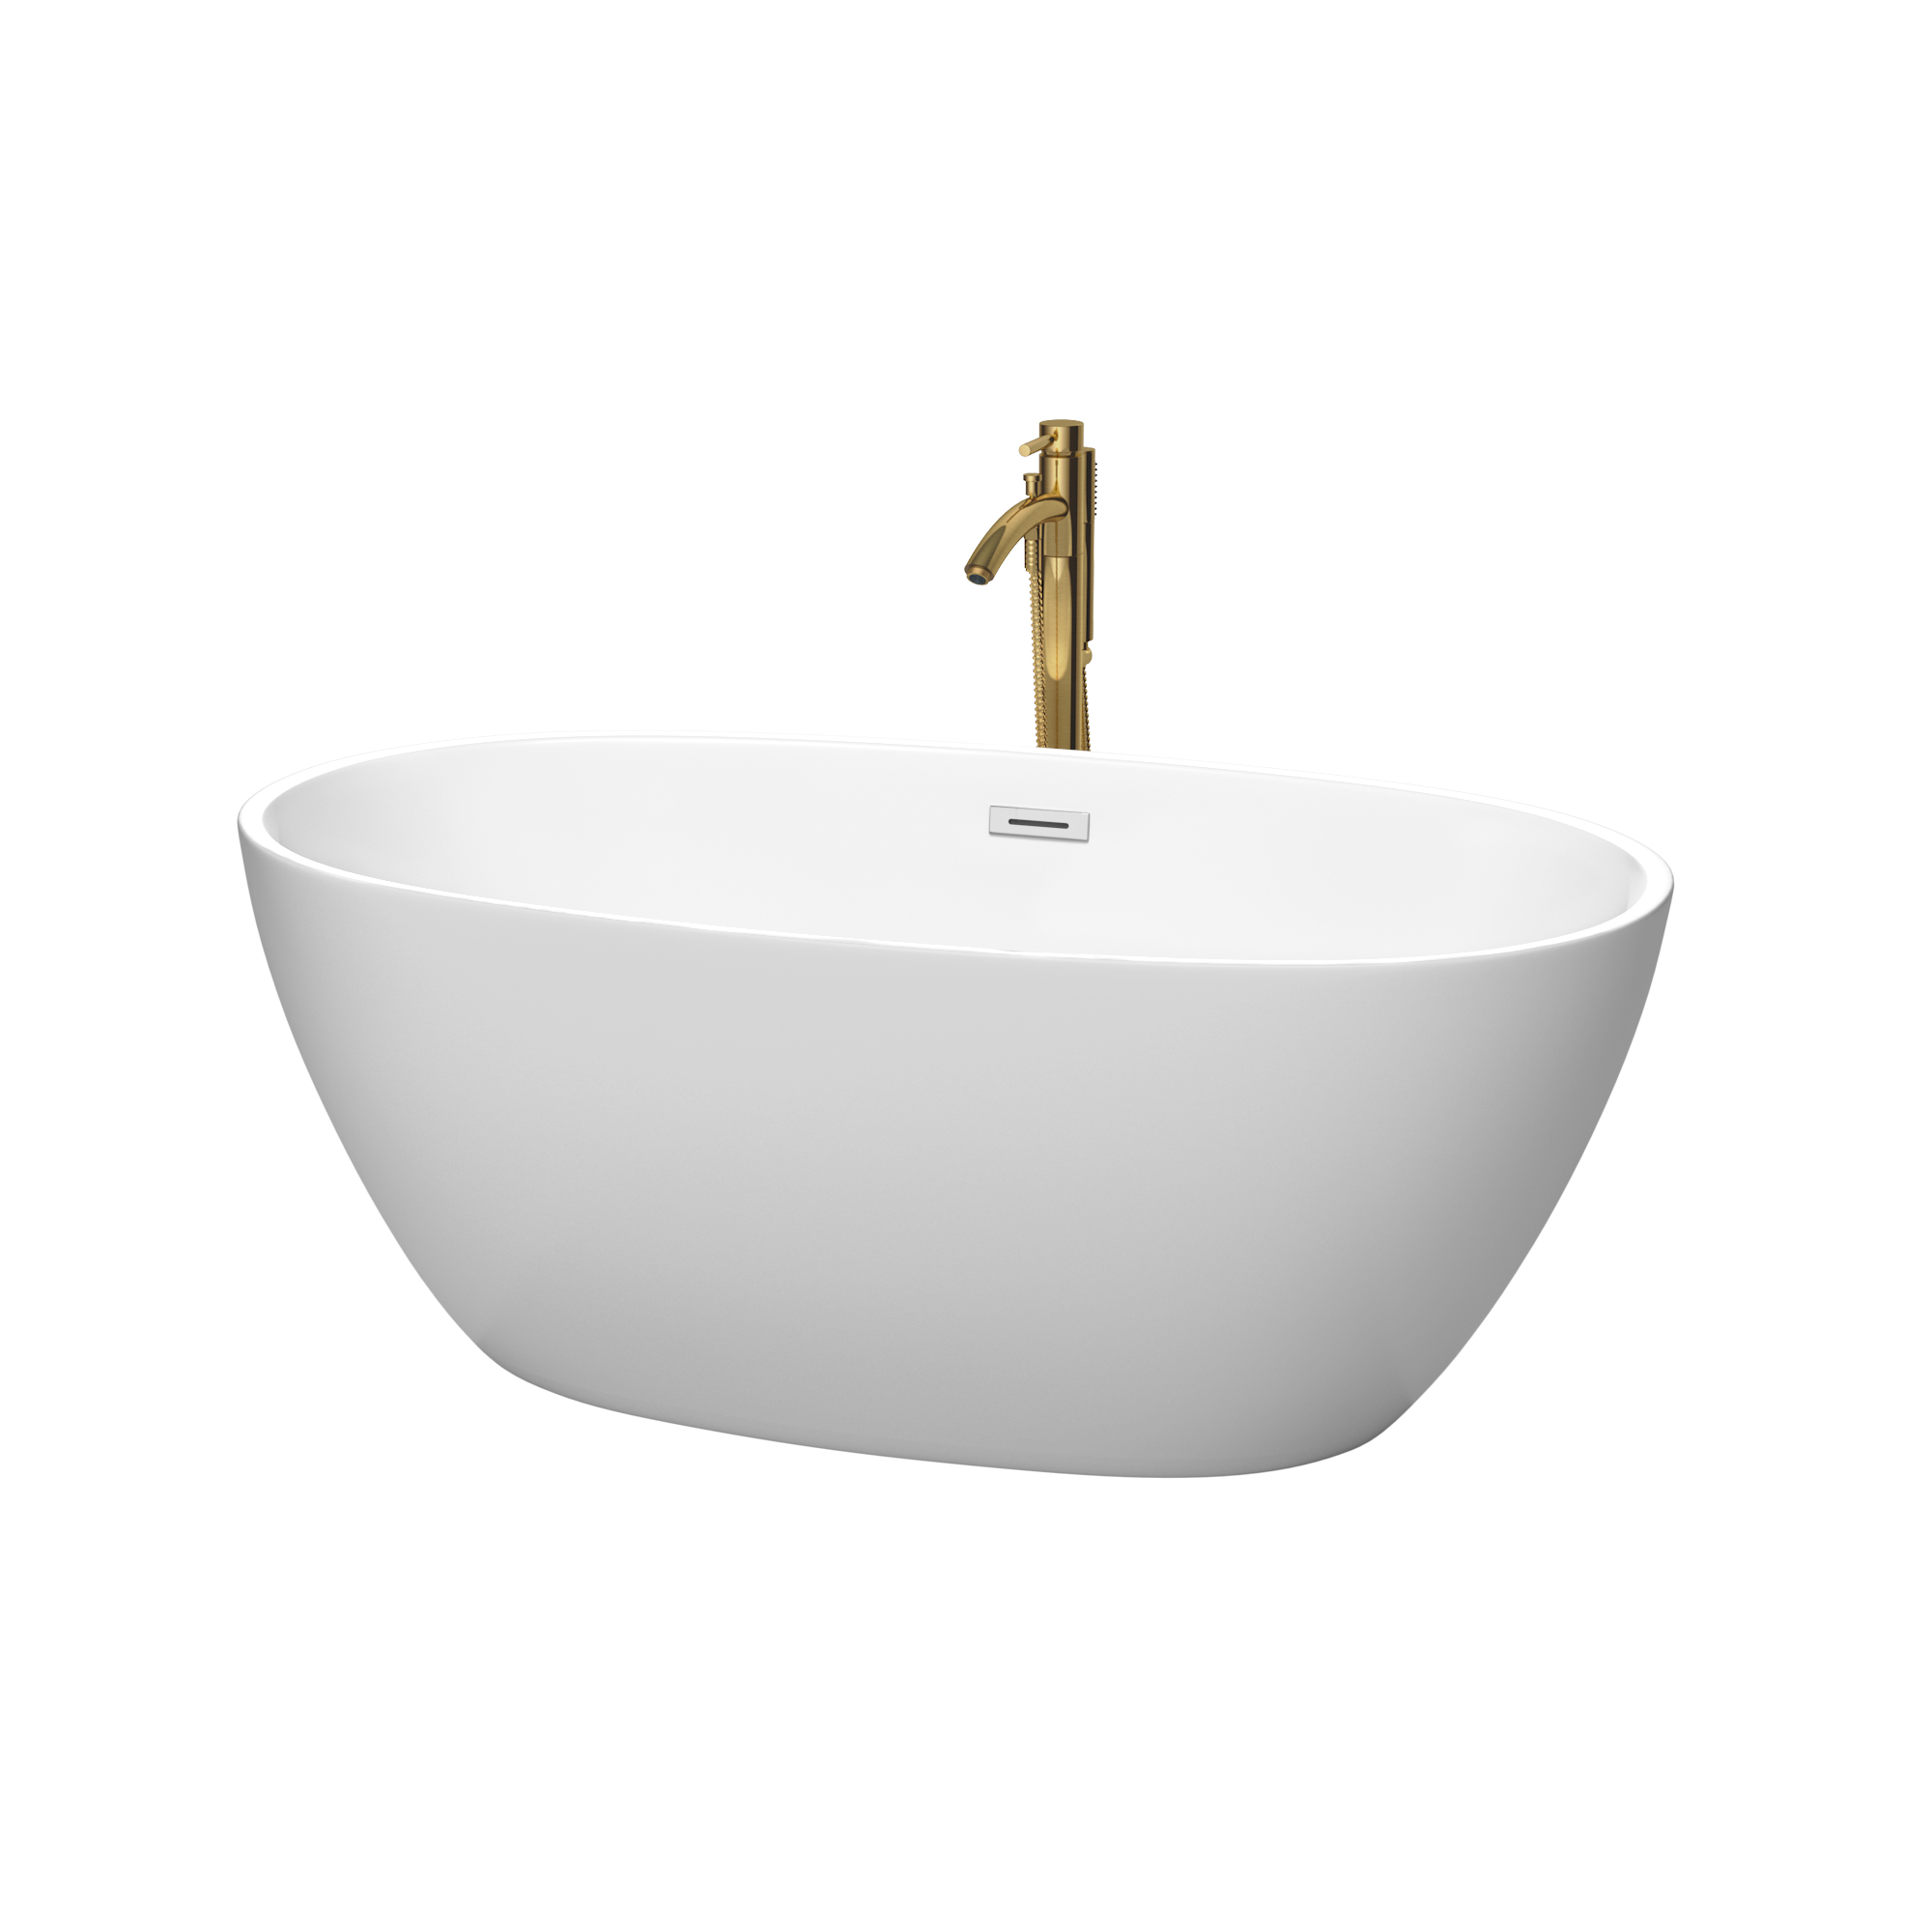 59" Freestanding Bathtub in Matte White with Polished Chrome Trim and Floor Mounted Faucet in Brushed Gold